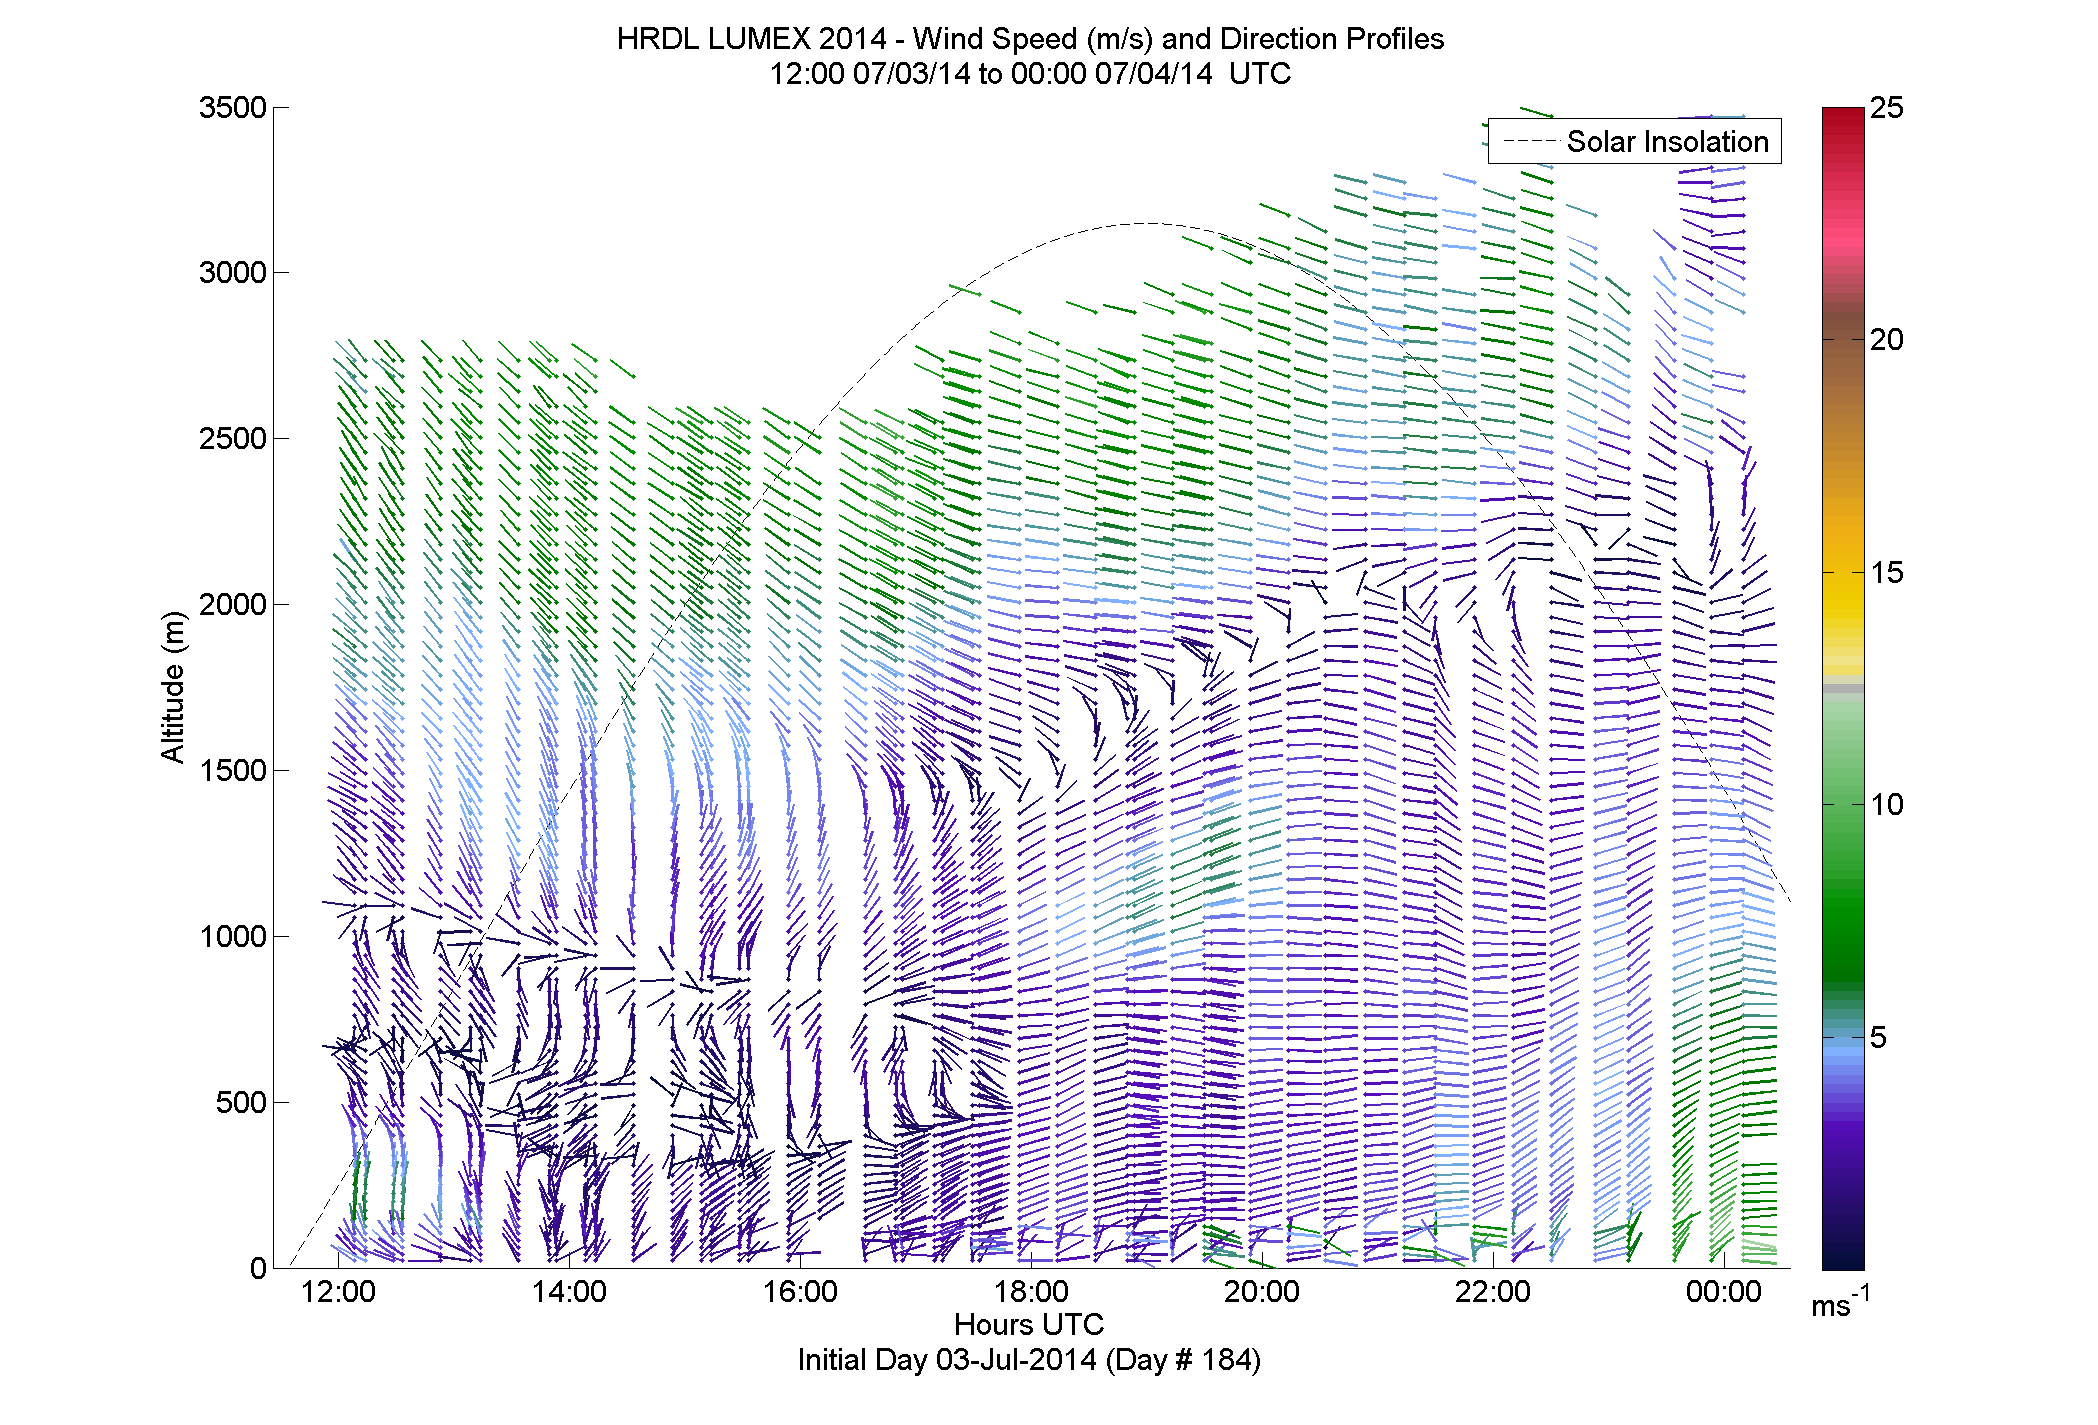 HRDL speed and direction profile - July 3 pm